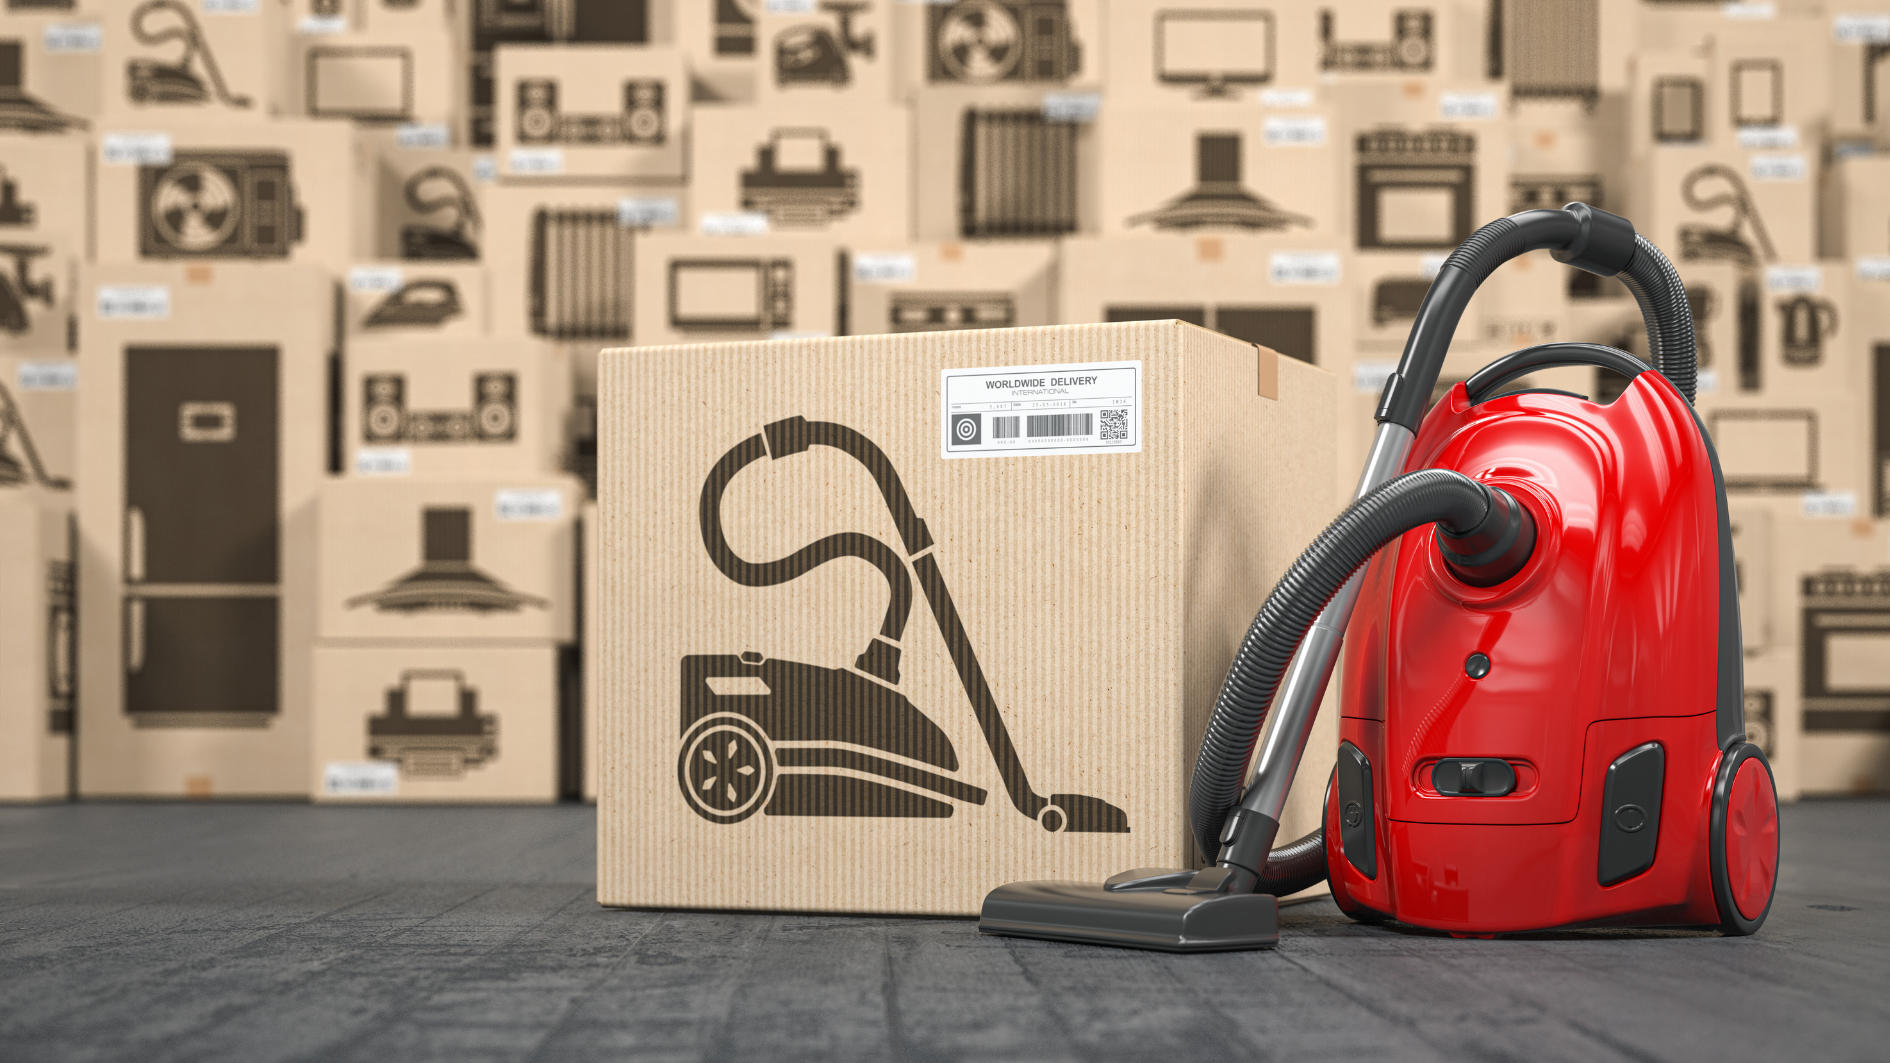 A vacuum cleaner surrounded by appliance boxes